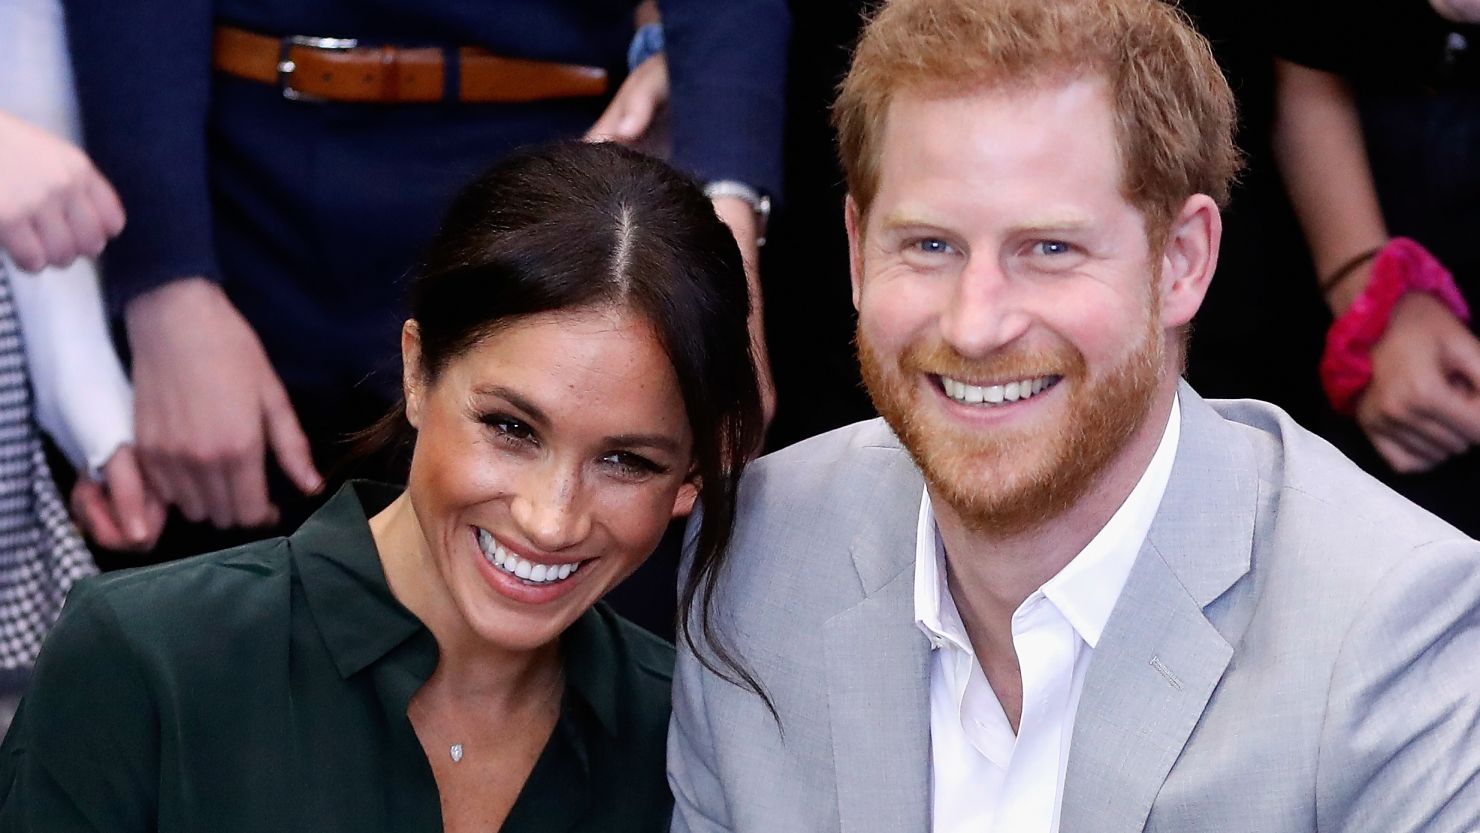 The former Meghan Markle and husband Prince Harry are expecting.